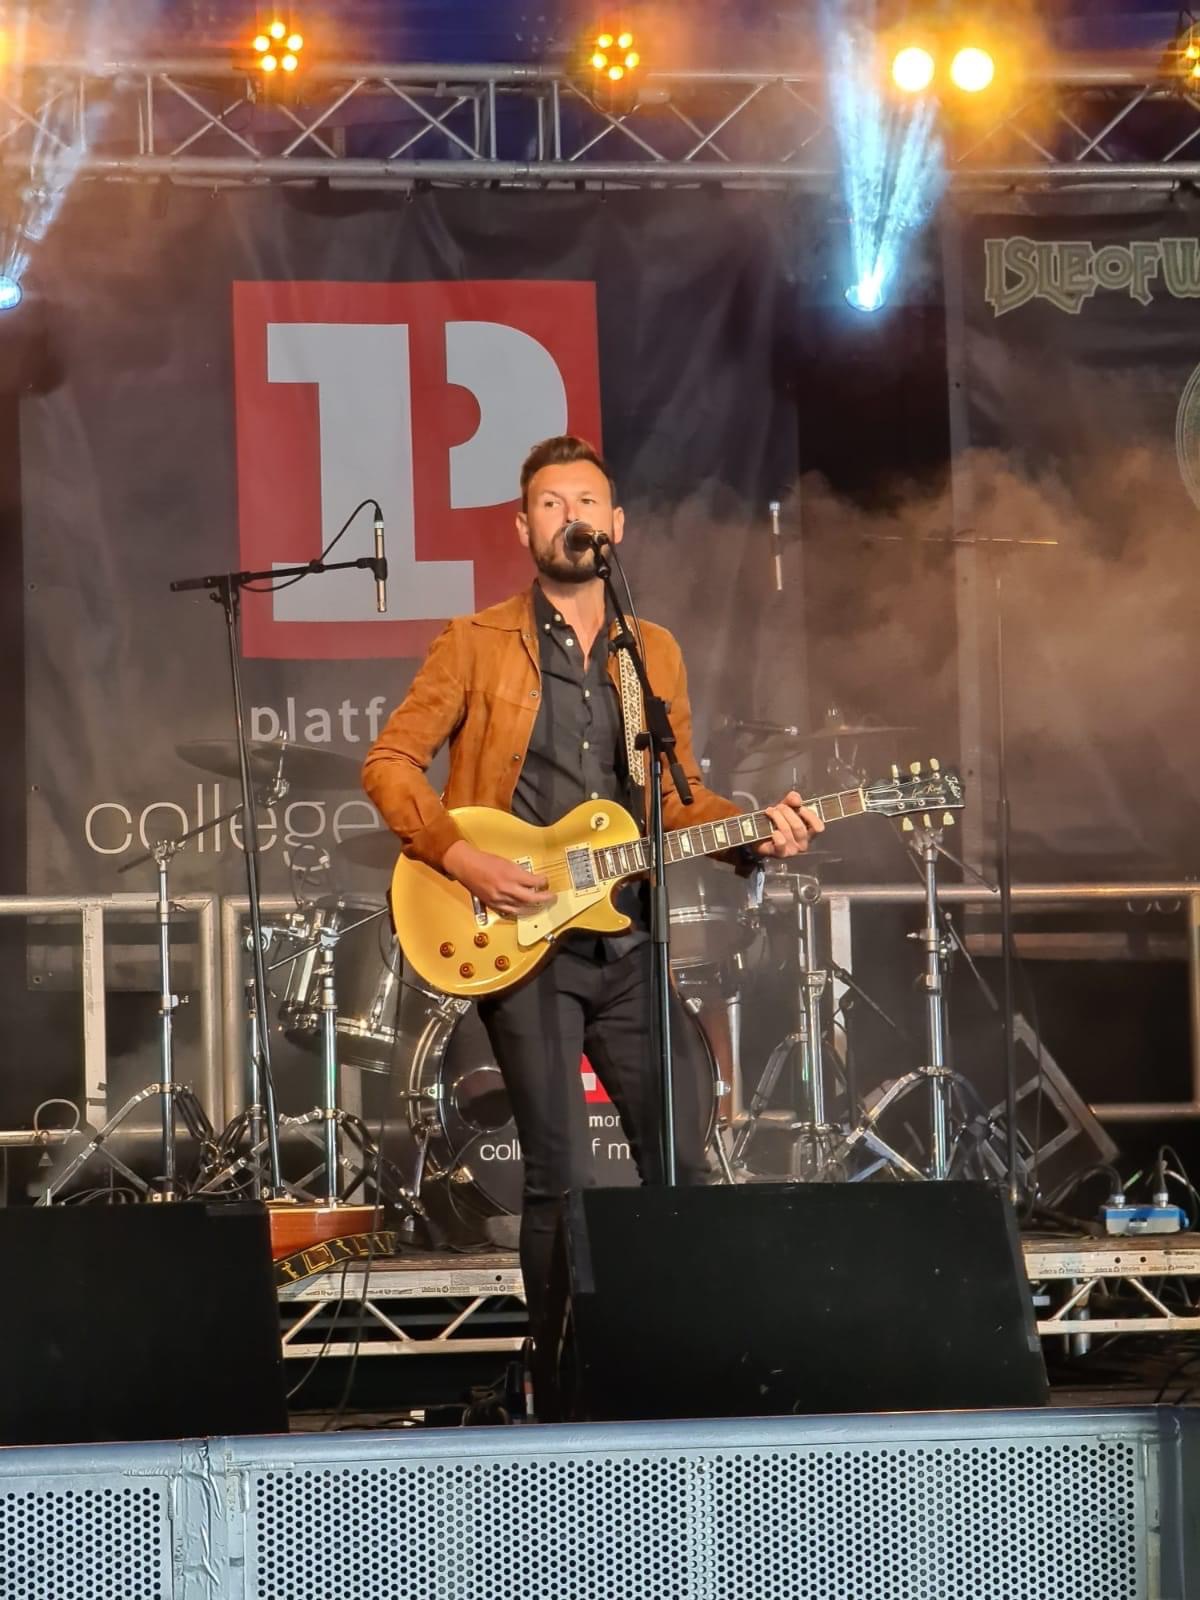 A man playing guitar and singing on a stage at a festival, he is wearing a tan jacket and dark clothing underneath